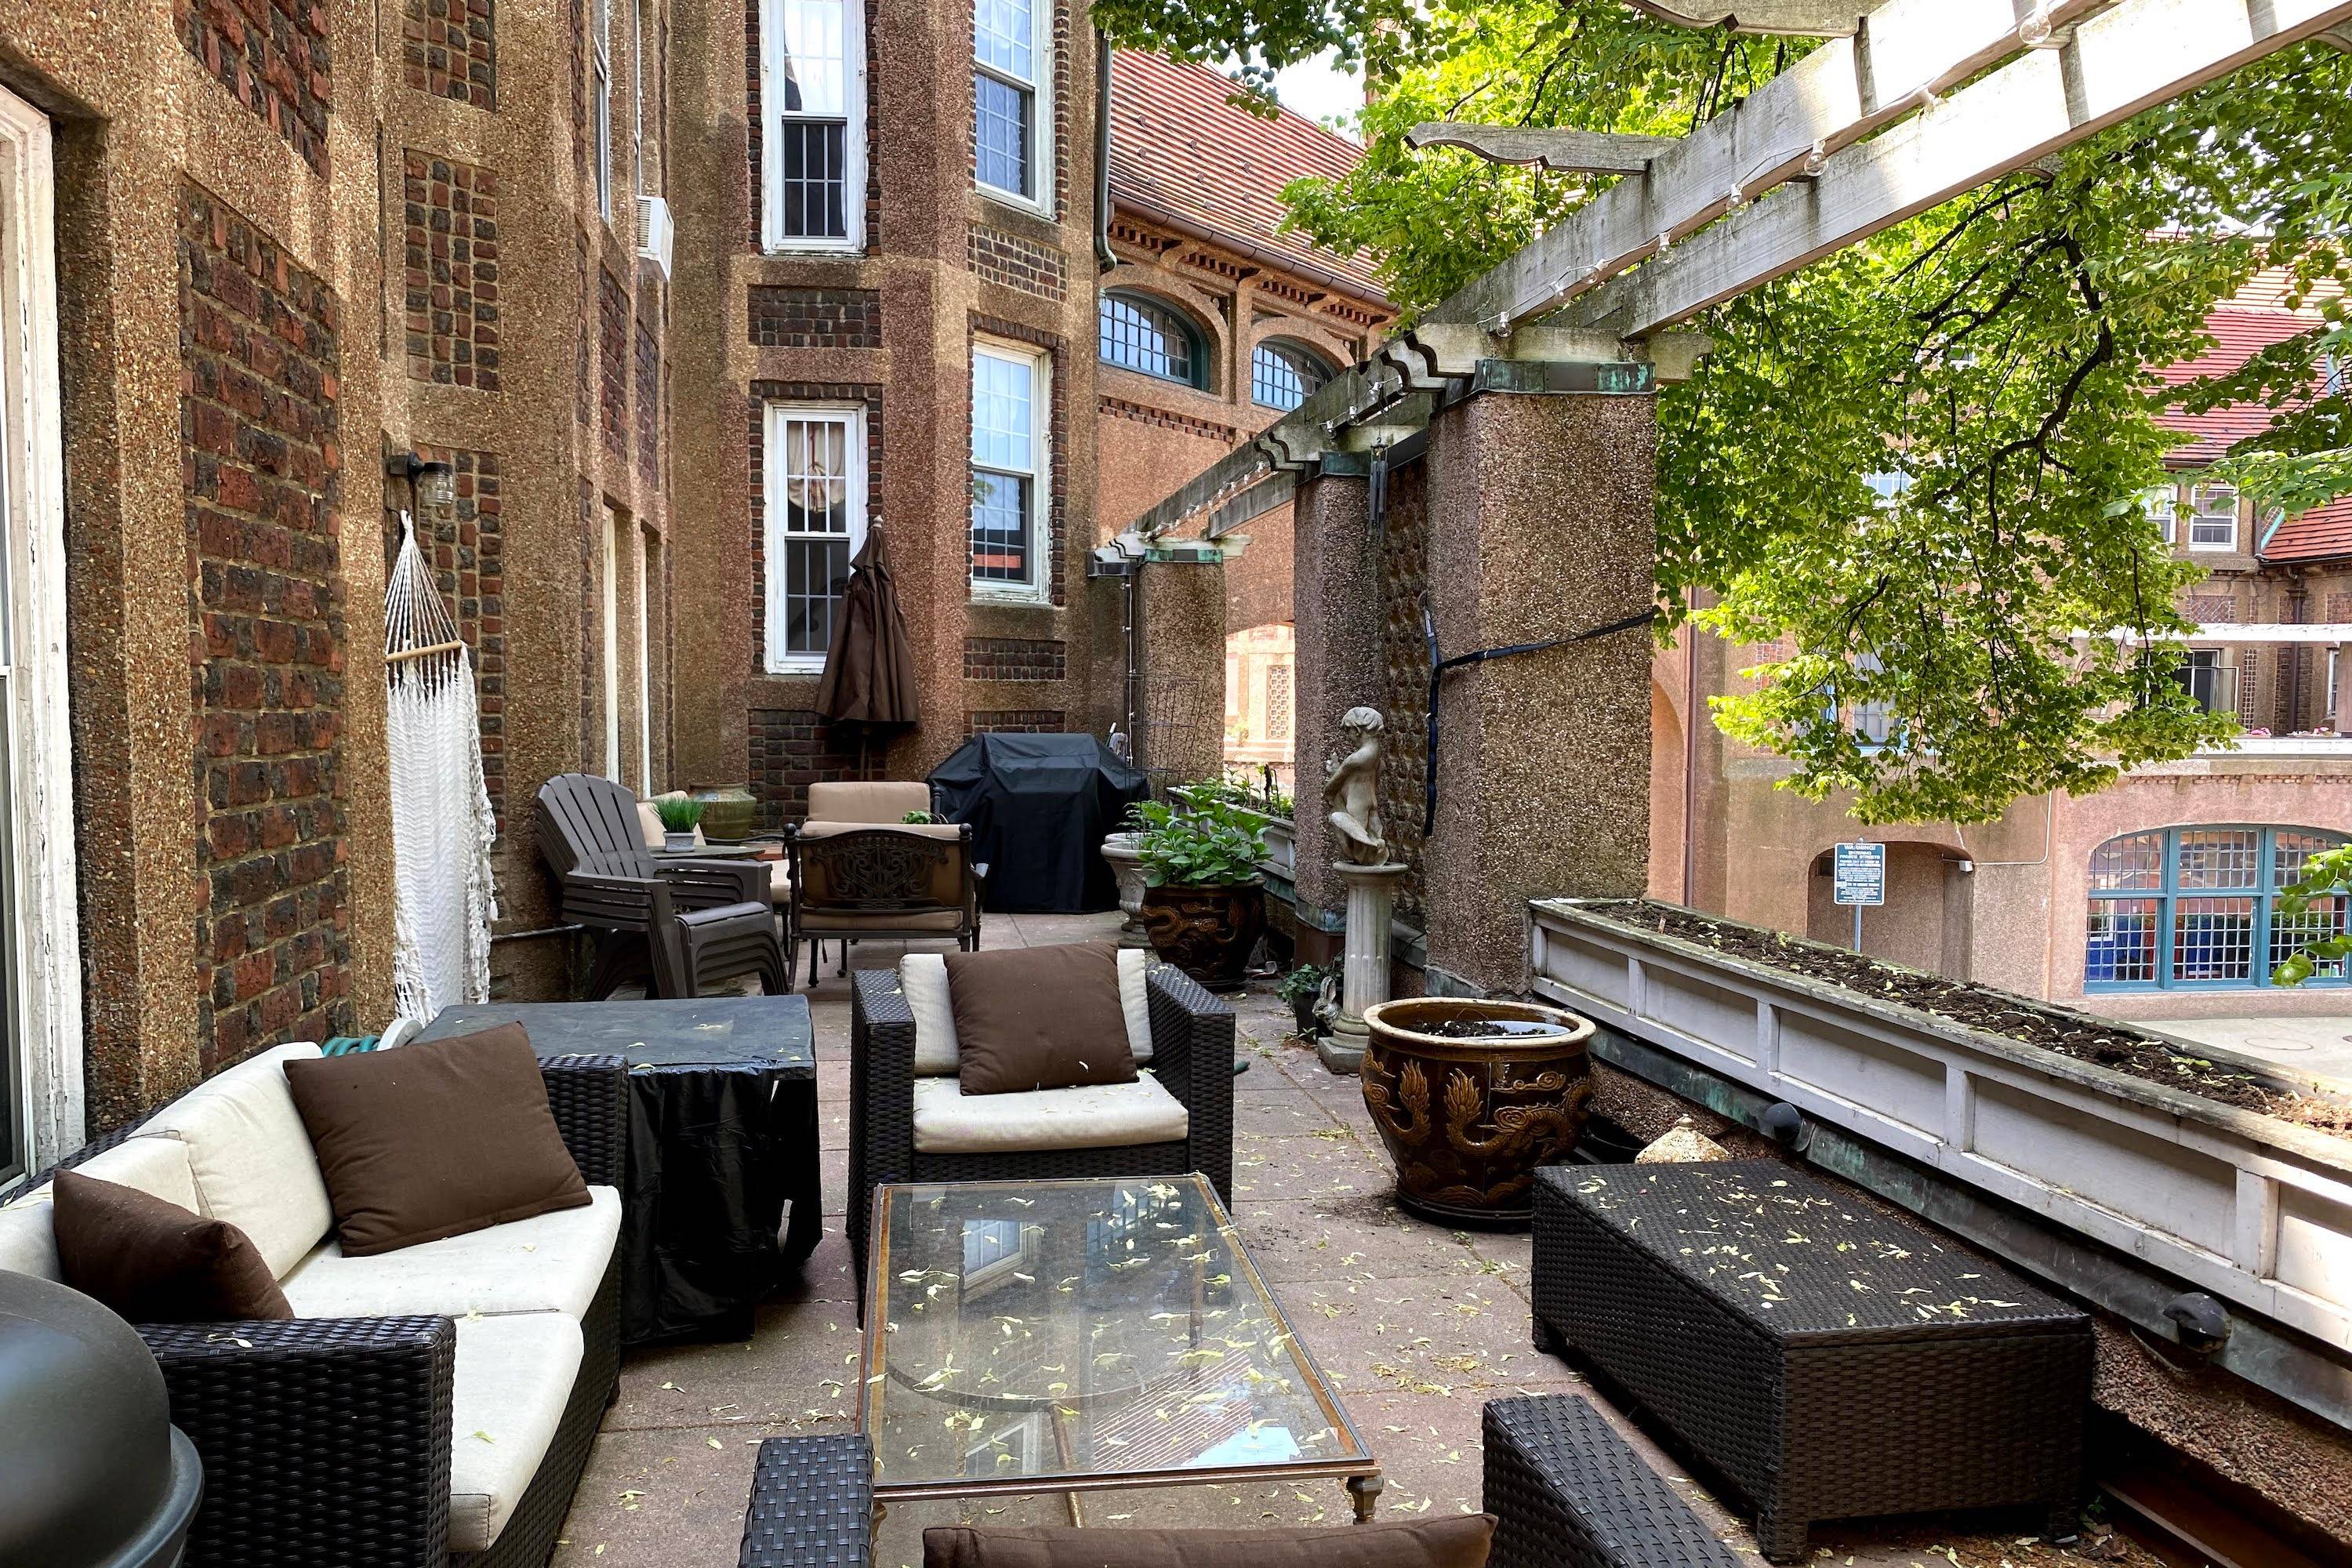 This is a once in a lifetime opportunity to buy a garden apartment overlooking historic Station Square.